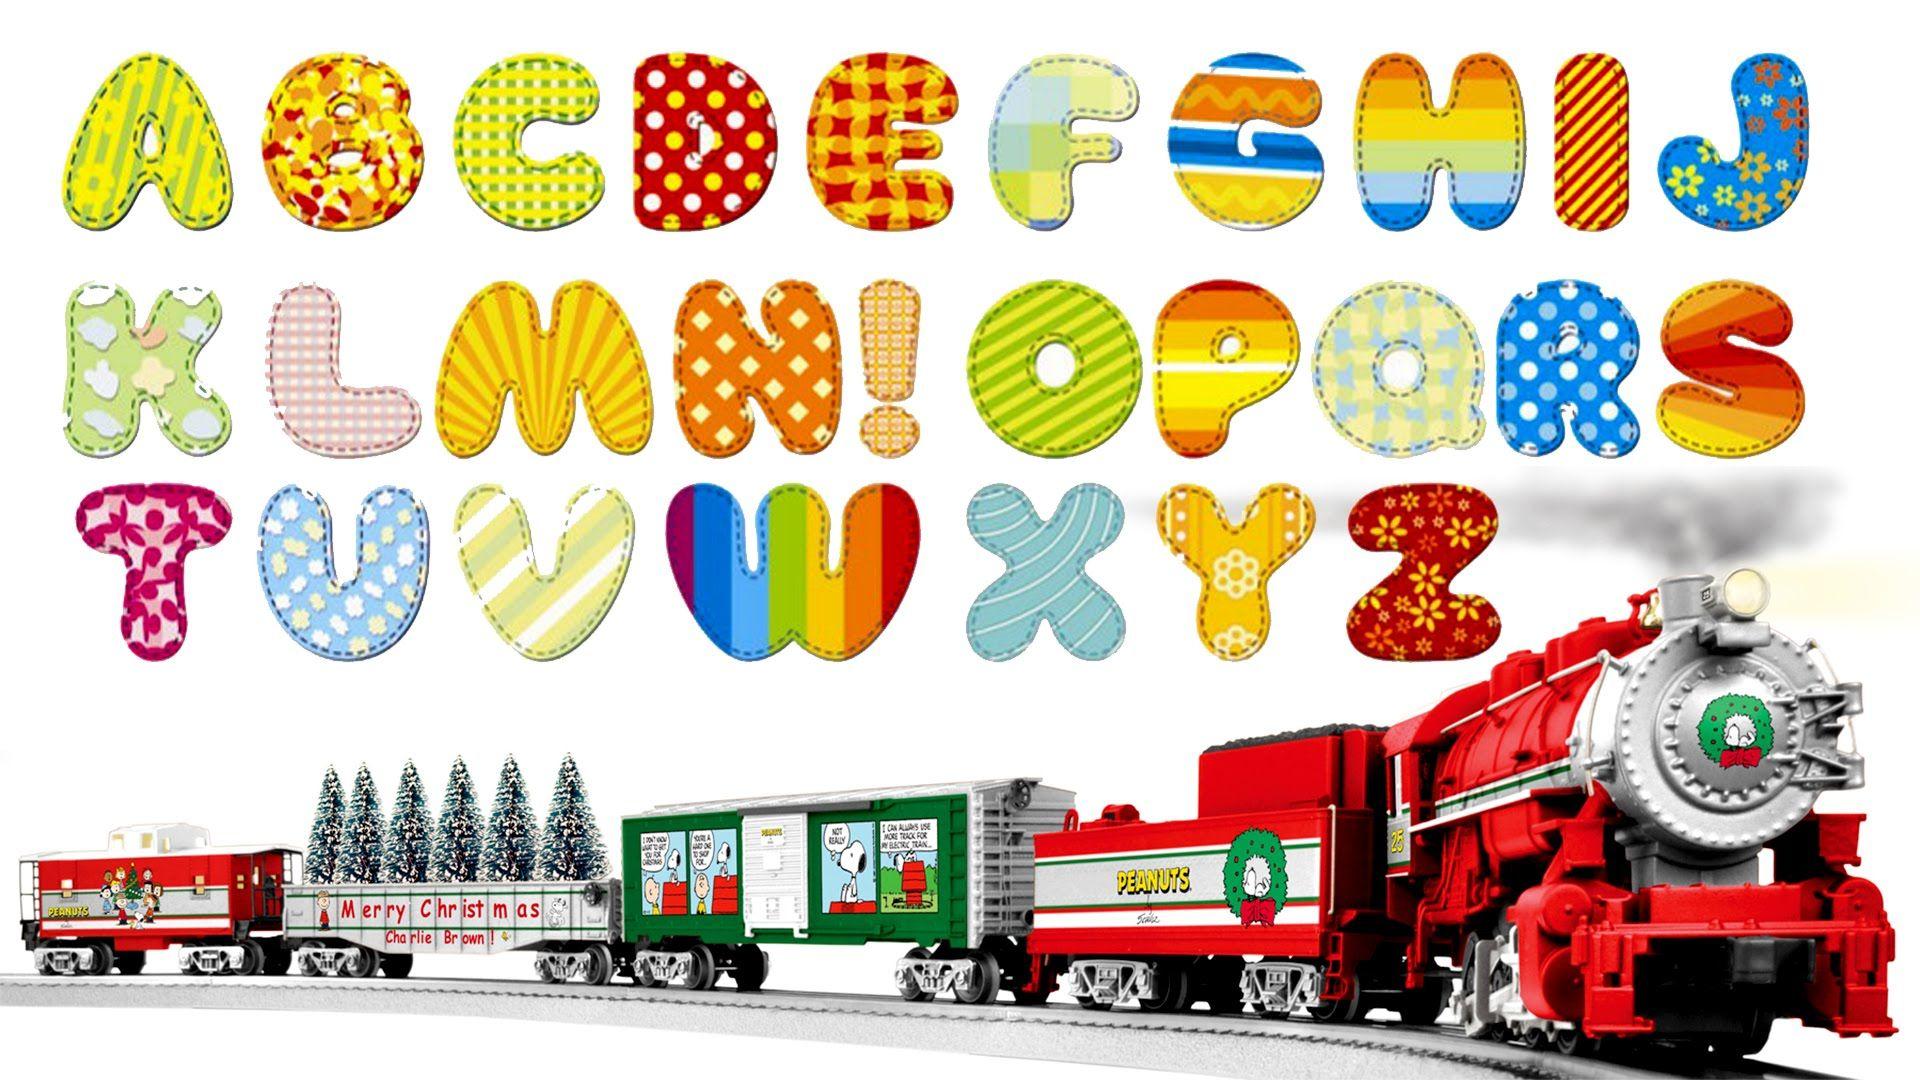 English Alphabets ABC, Alphabet Writing, Letter Sounds, Learn